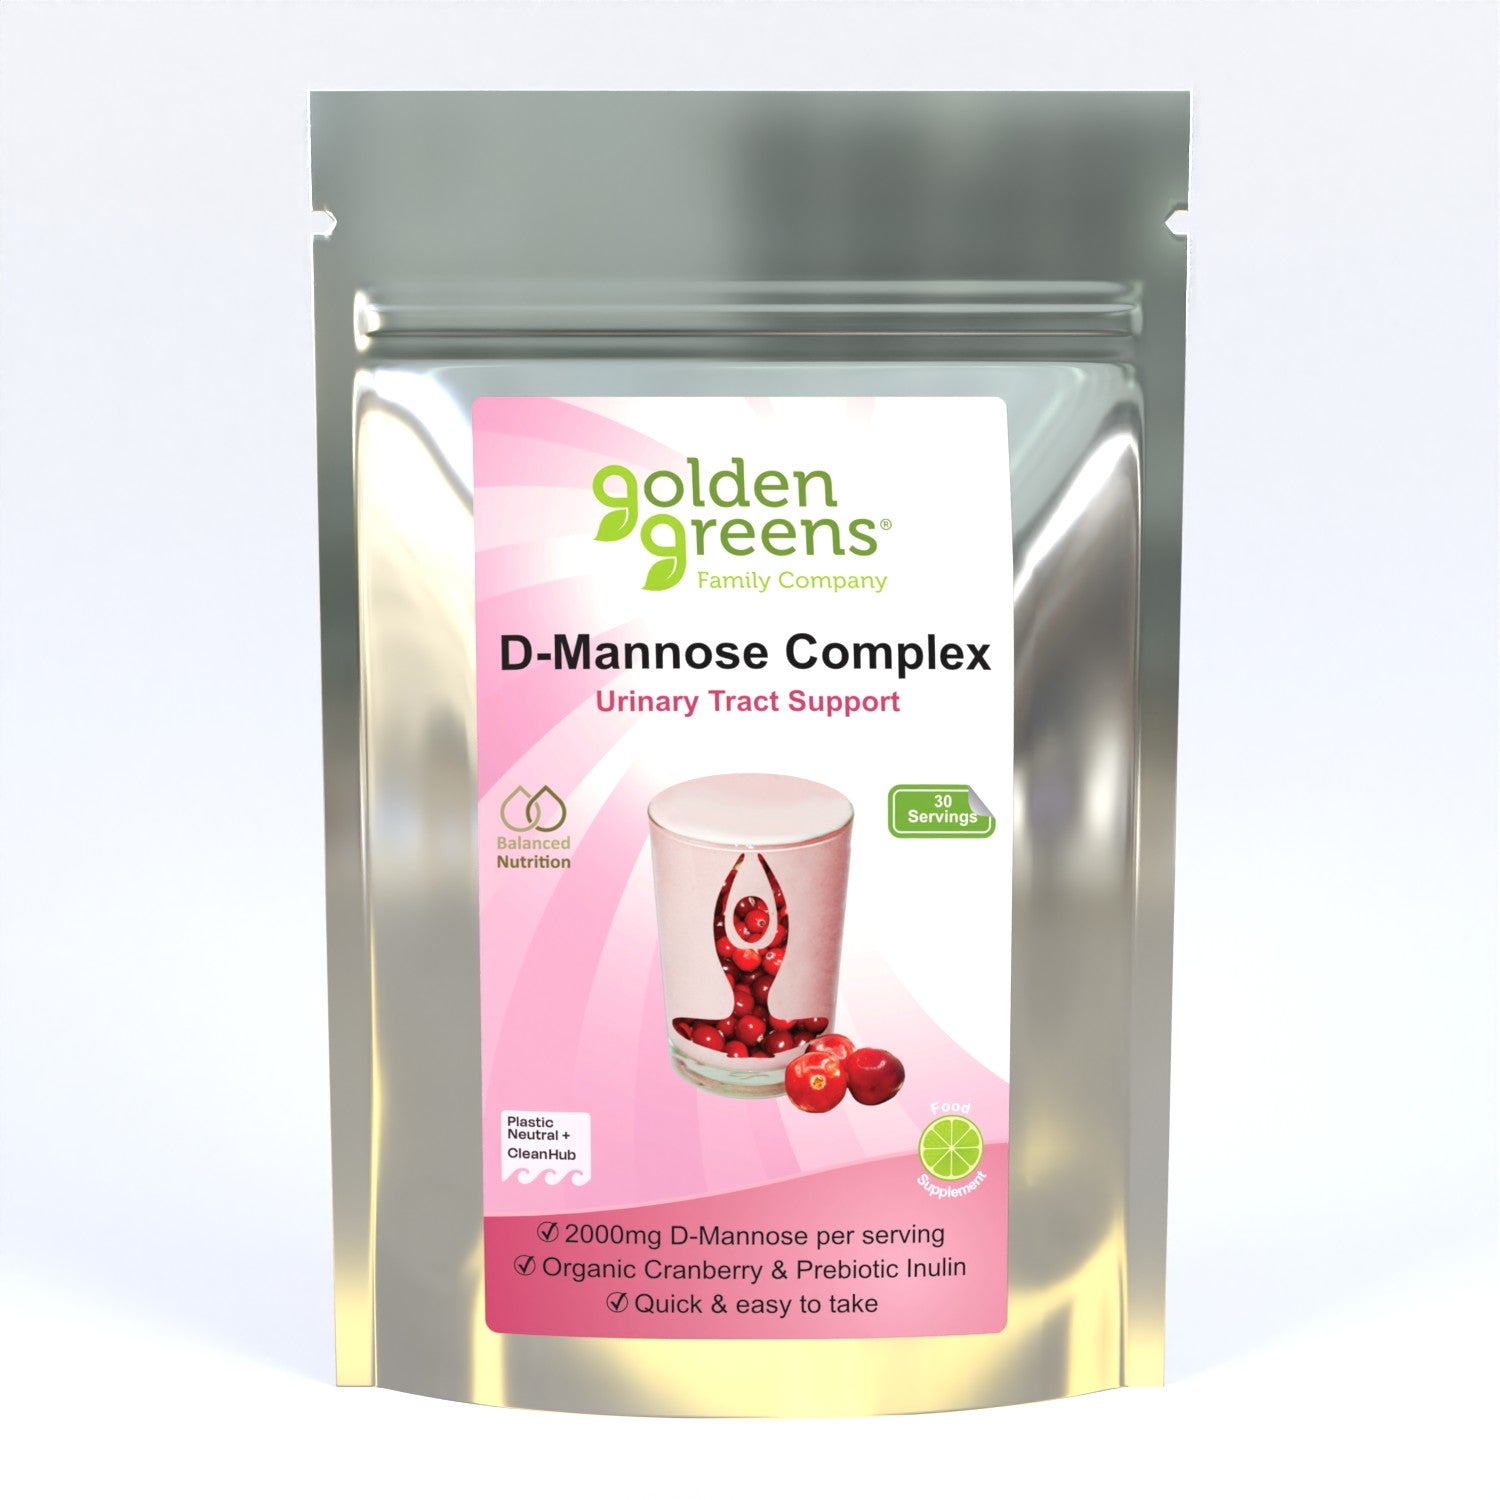 View DMannose Urinary Tract Support information